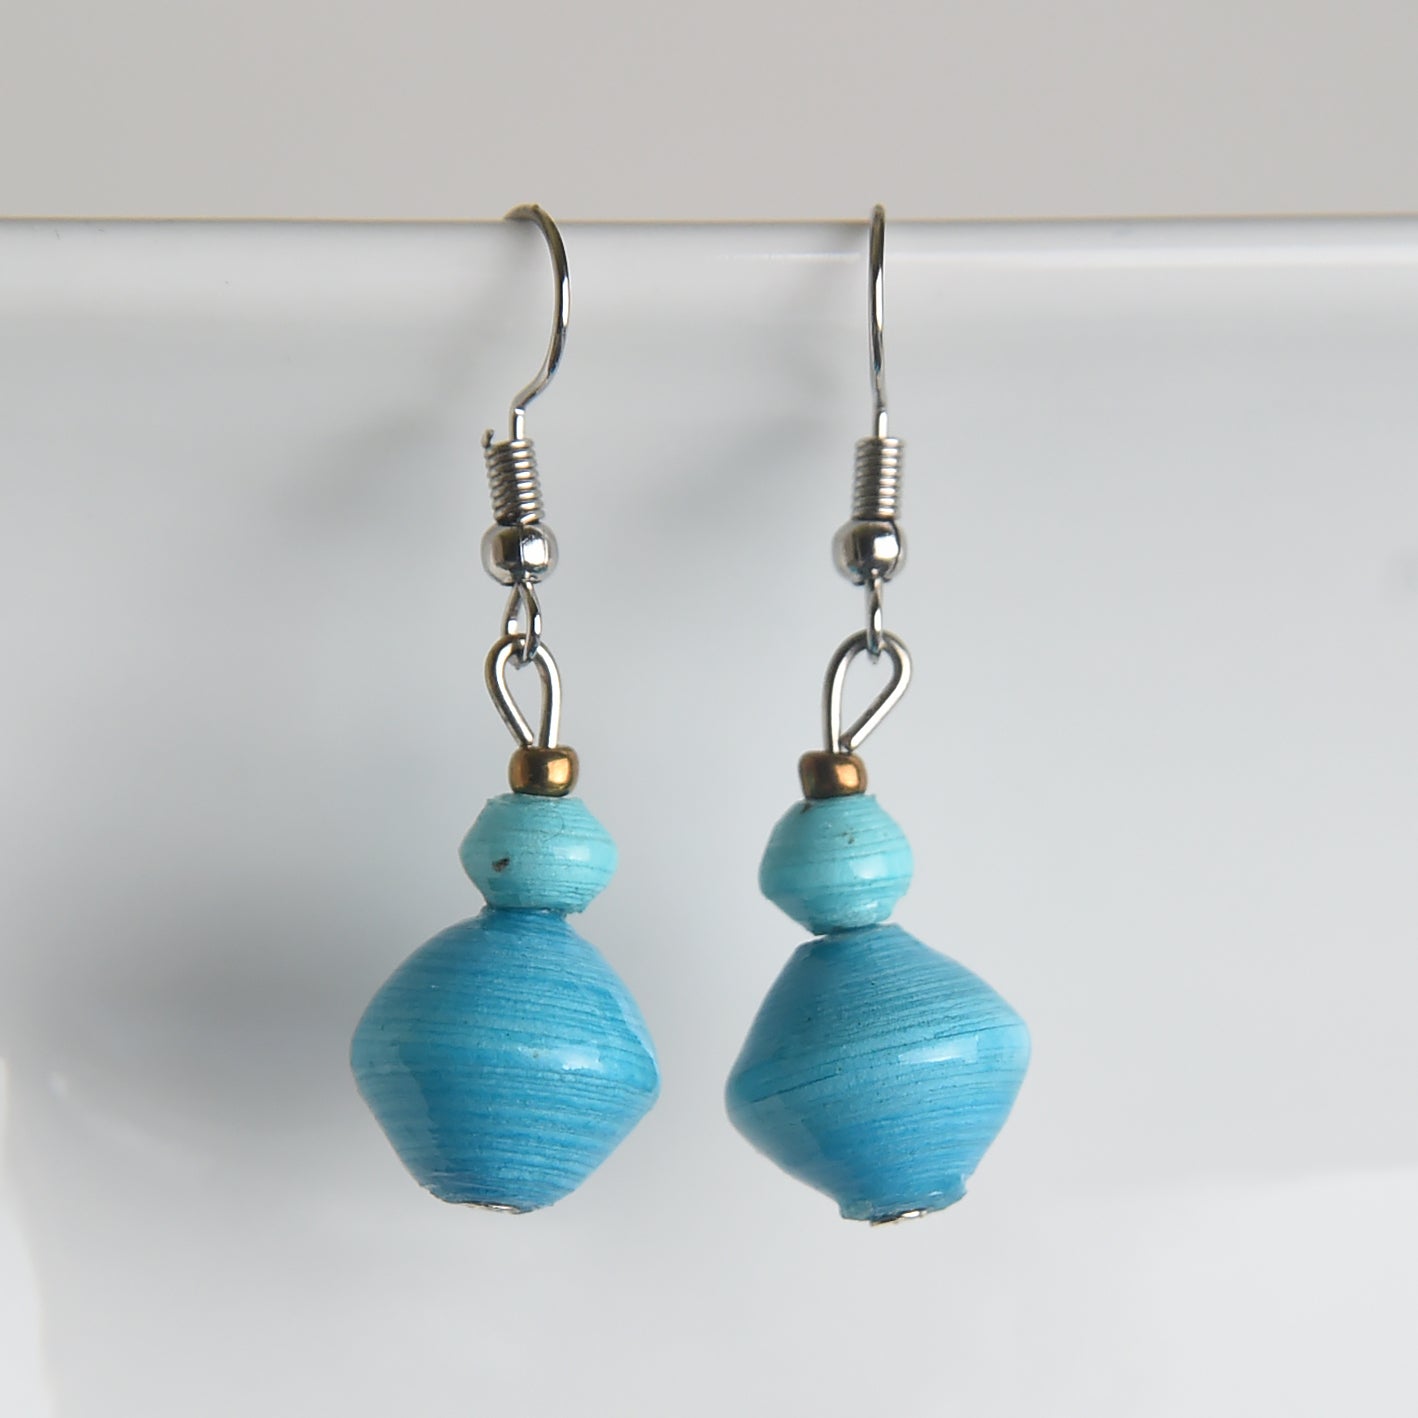 Recycled paper bead earrings – N9na's Apothecary